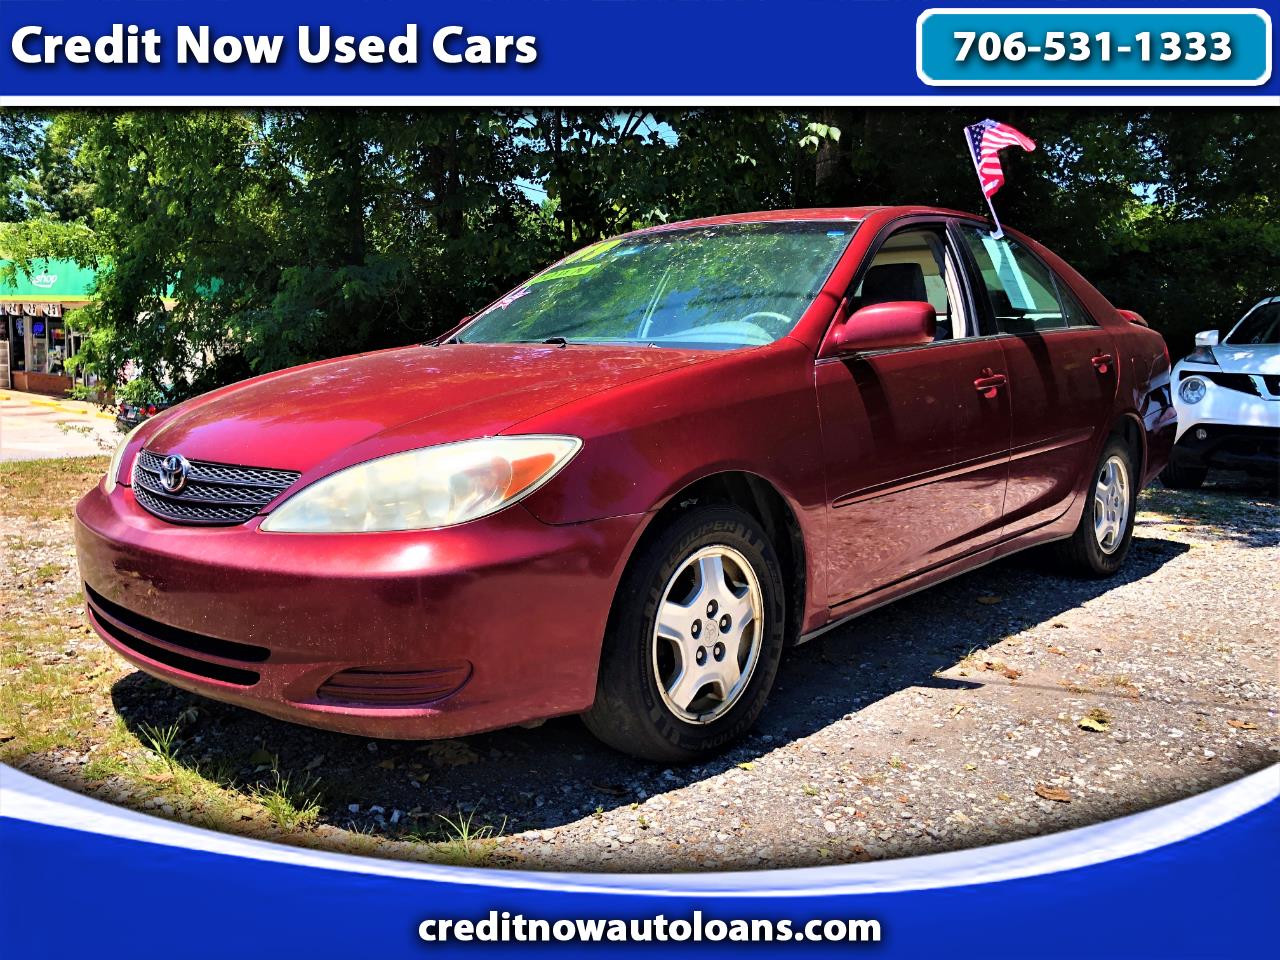 Toyota Camry 4dr Sdn XLE V6 Auto (Natl) 2003